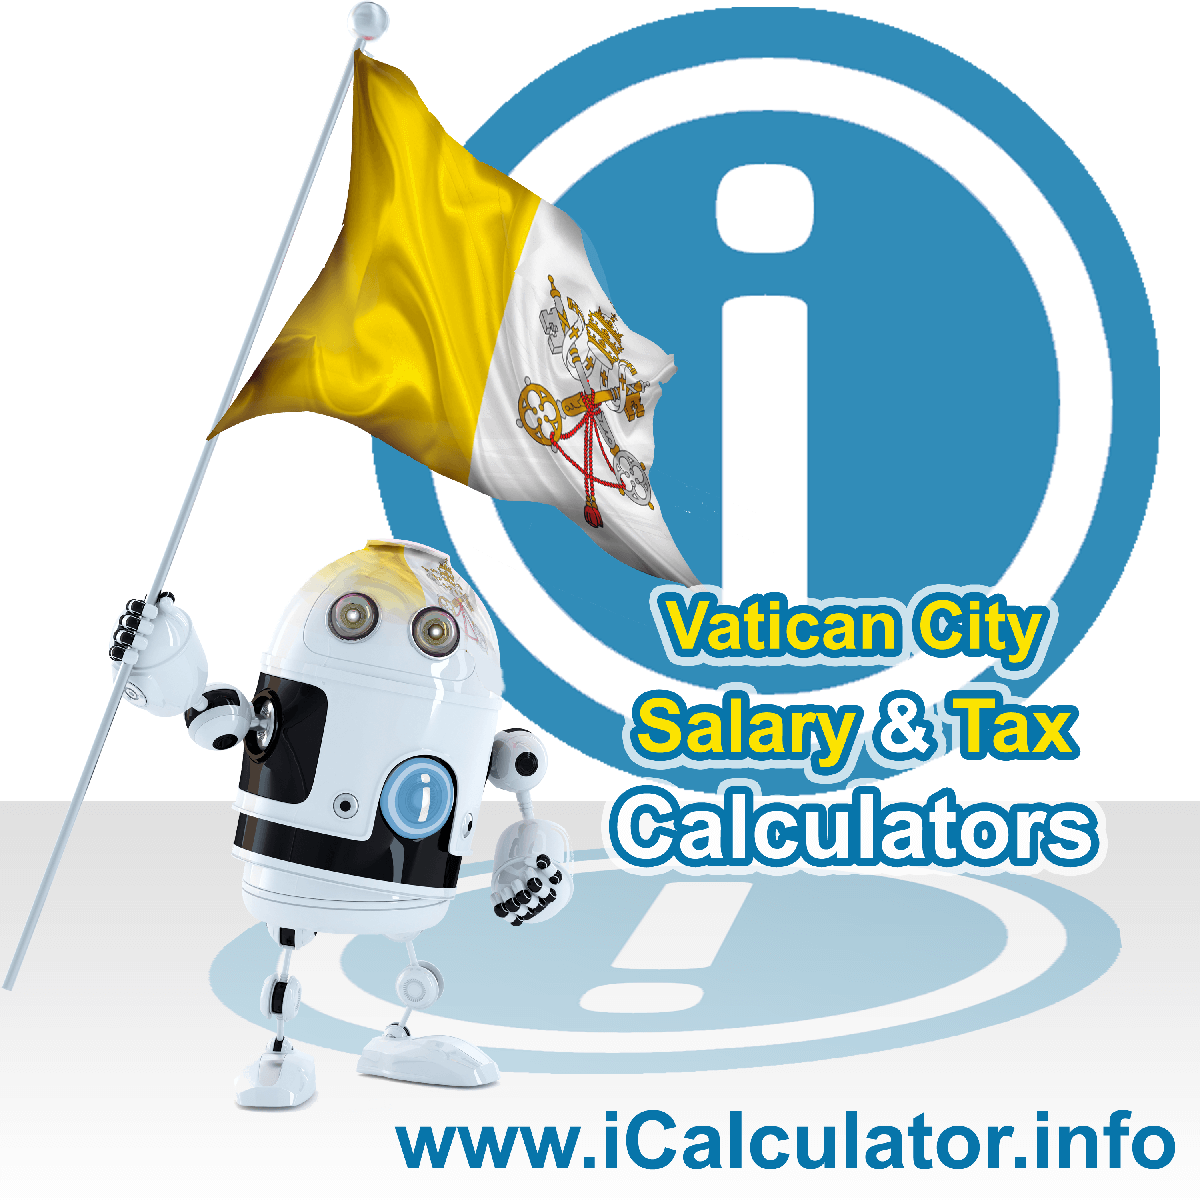 Vatican City Tax Calculator. This image shows the Vatican City flag and information relating to the tax formula for the Vatican City Salary Calculator